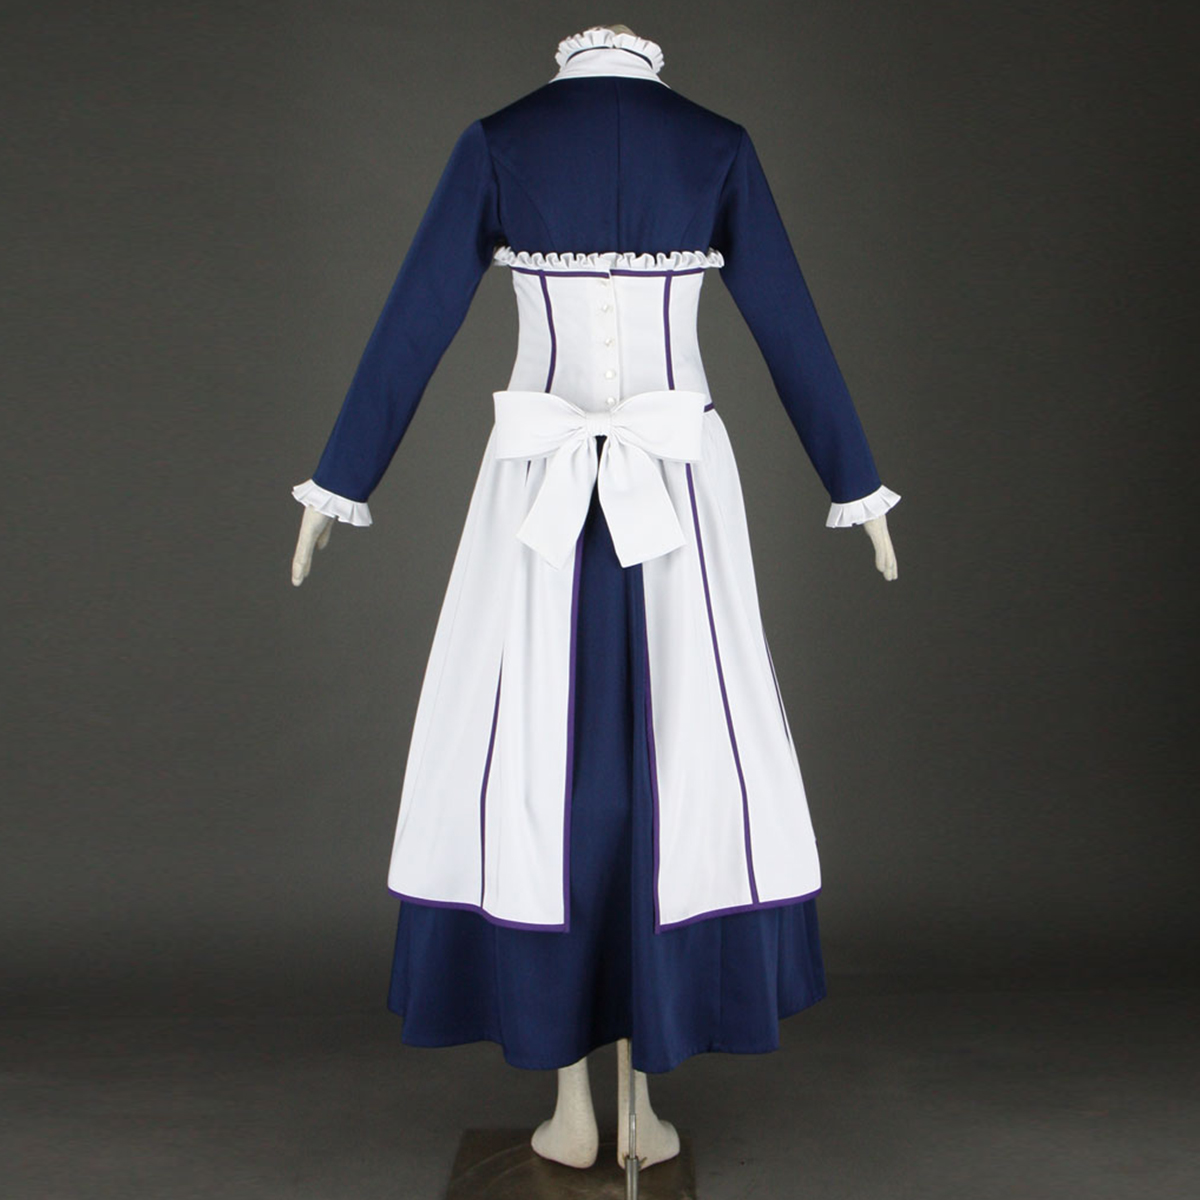 Black Butler Hannah Annafellows 1 Maid Anime Cosplay Costumes Outfit